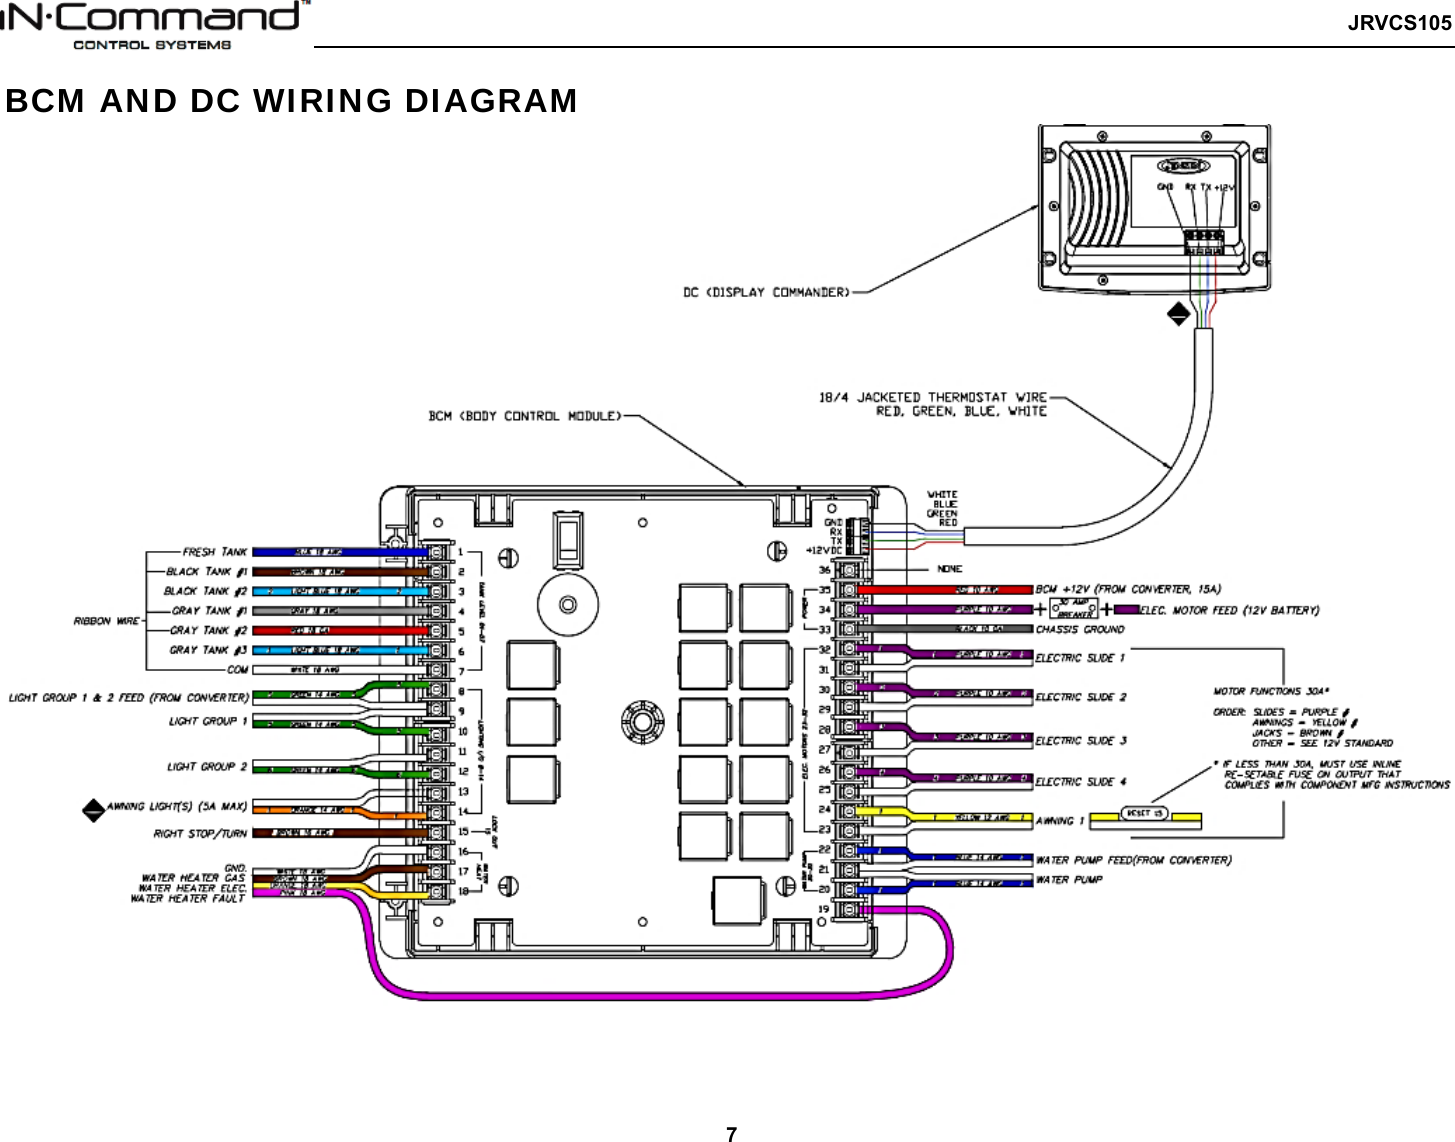   JRVCS105   7 BCM AND DC WIRING DIAGRAM 